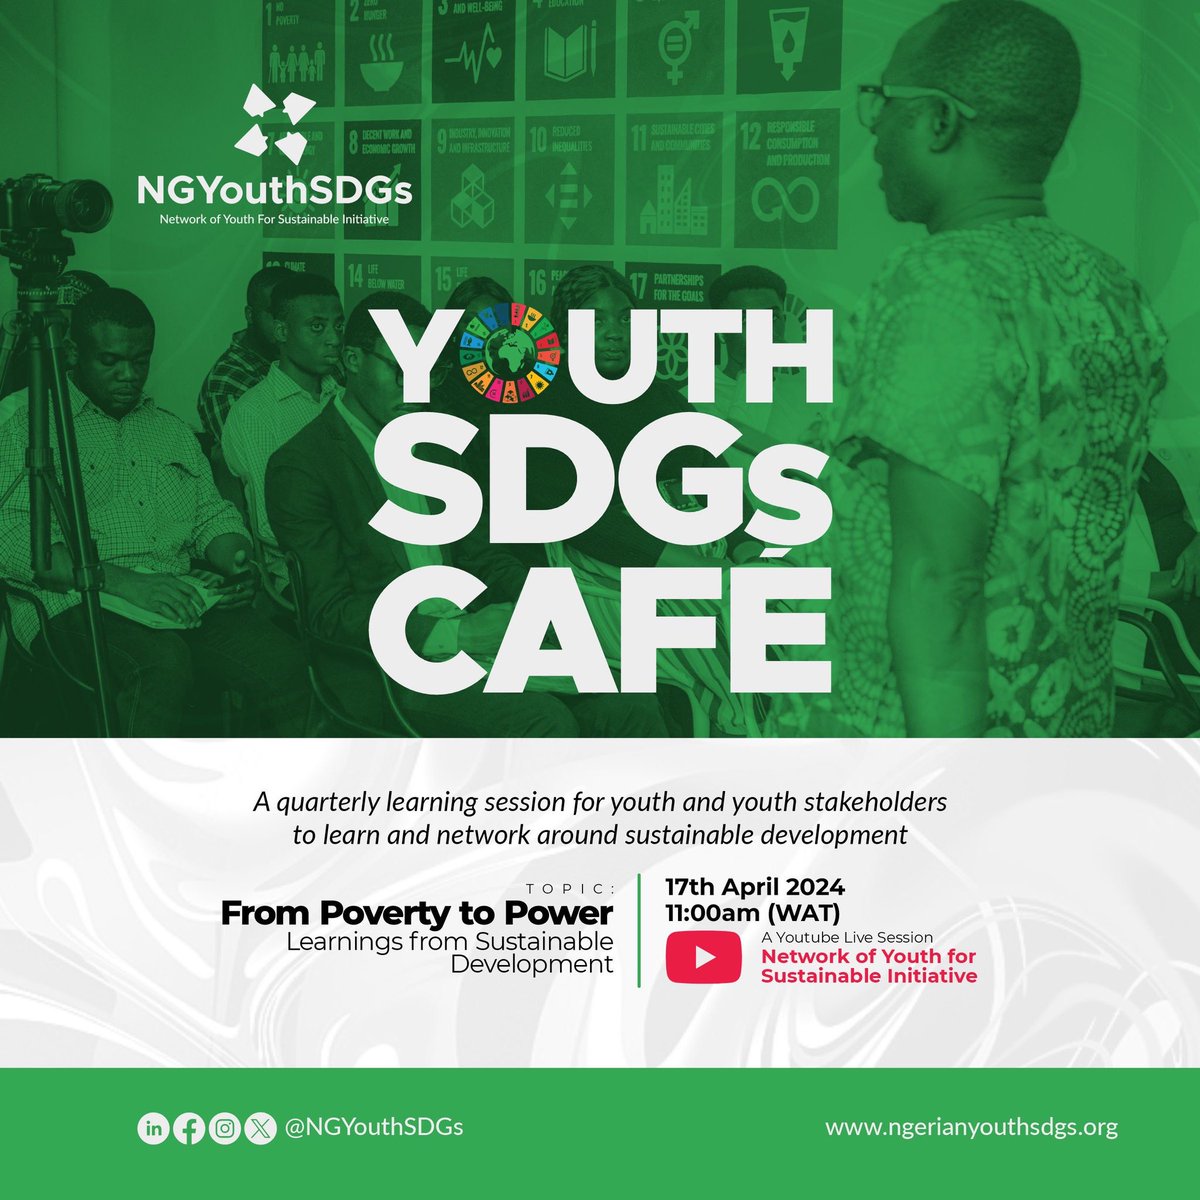 📌When #young people come together to discuss the key concepts, challenges and progress for sustainable development, change happens! 🤝The Youth SDGs Cafe, facilitated by our speaker, @RuthMaiaLyons will provide a dynamic platform to foster advocacy for sustainable development.🌍